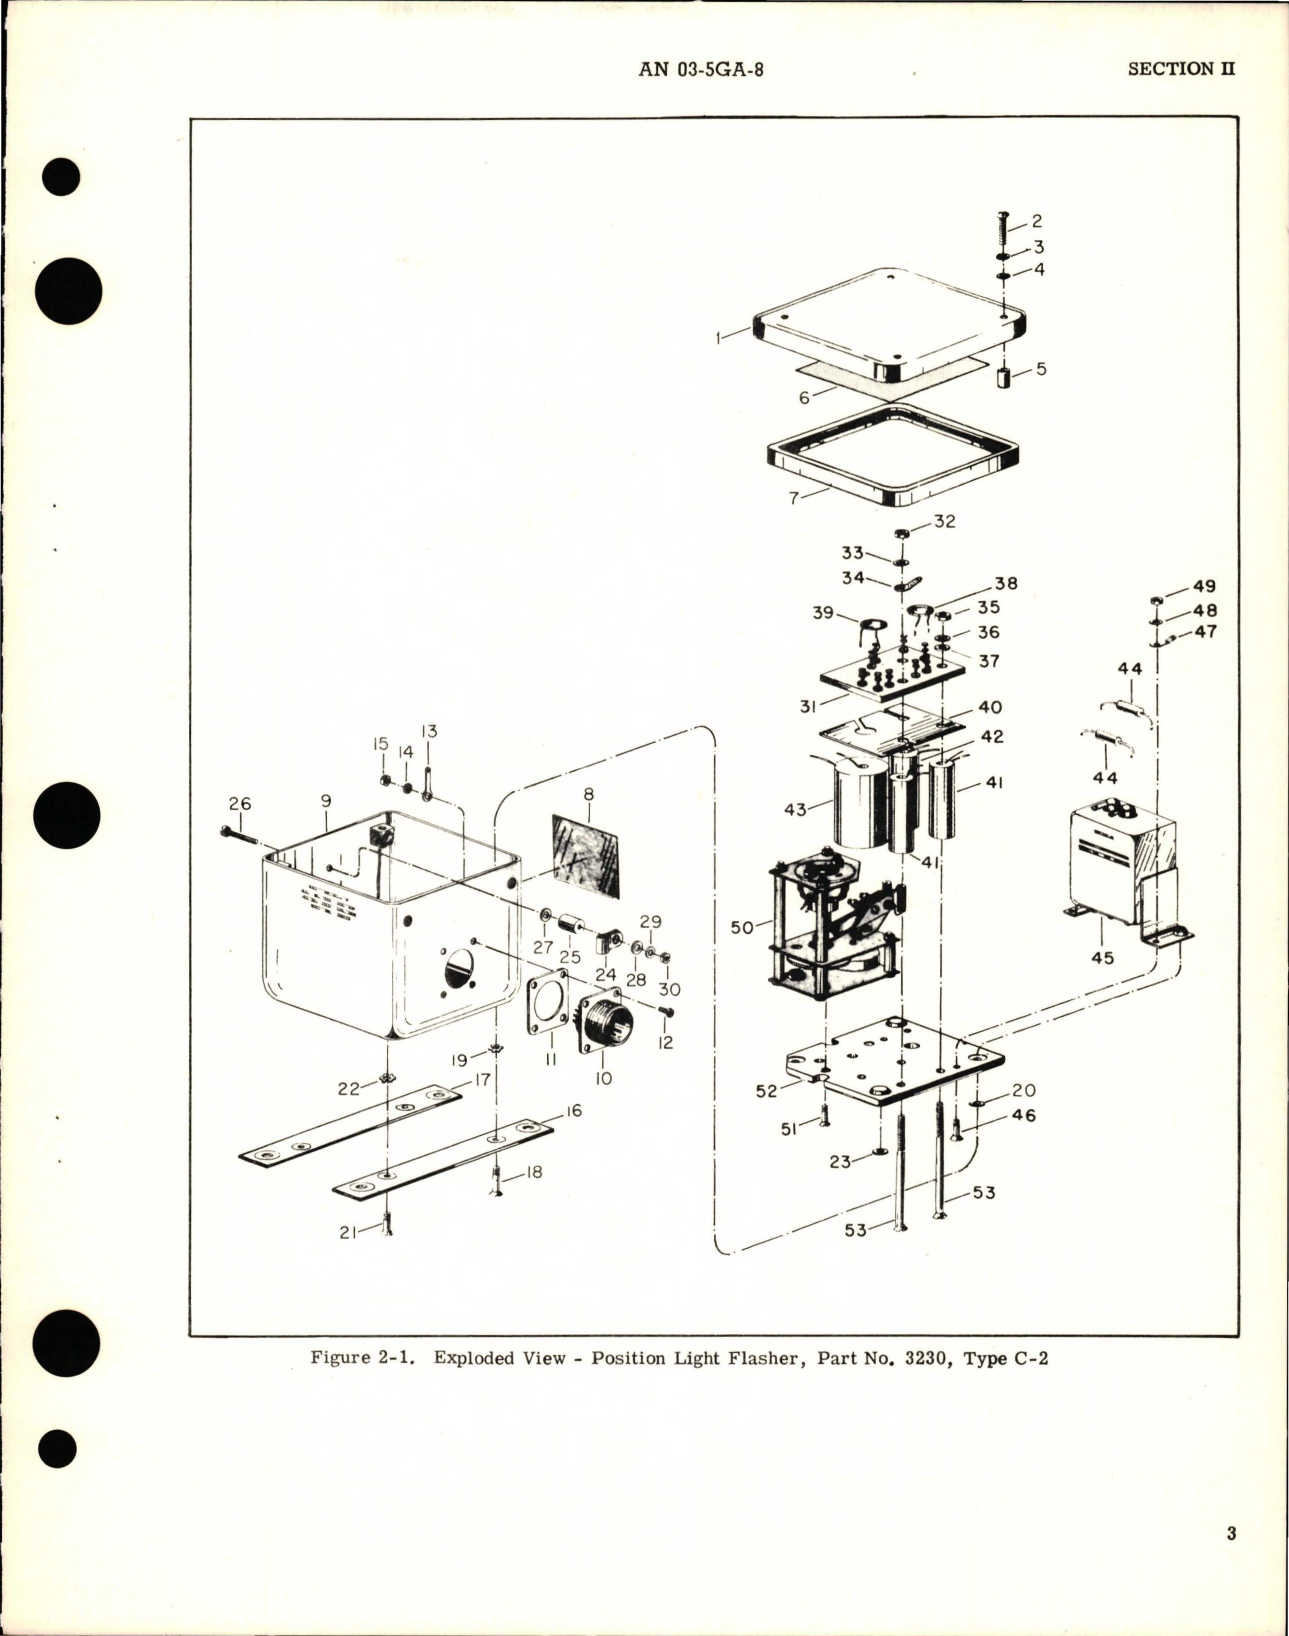 Sample page 5 from AirCorps Library document: Overhaul Instructions for Position Light Flasher - Type C-2, Parts 3230, 3230-1, 3230-2, 3285, and 3295